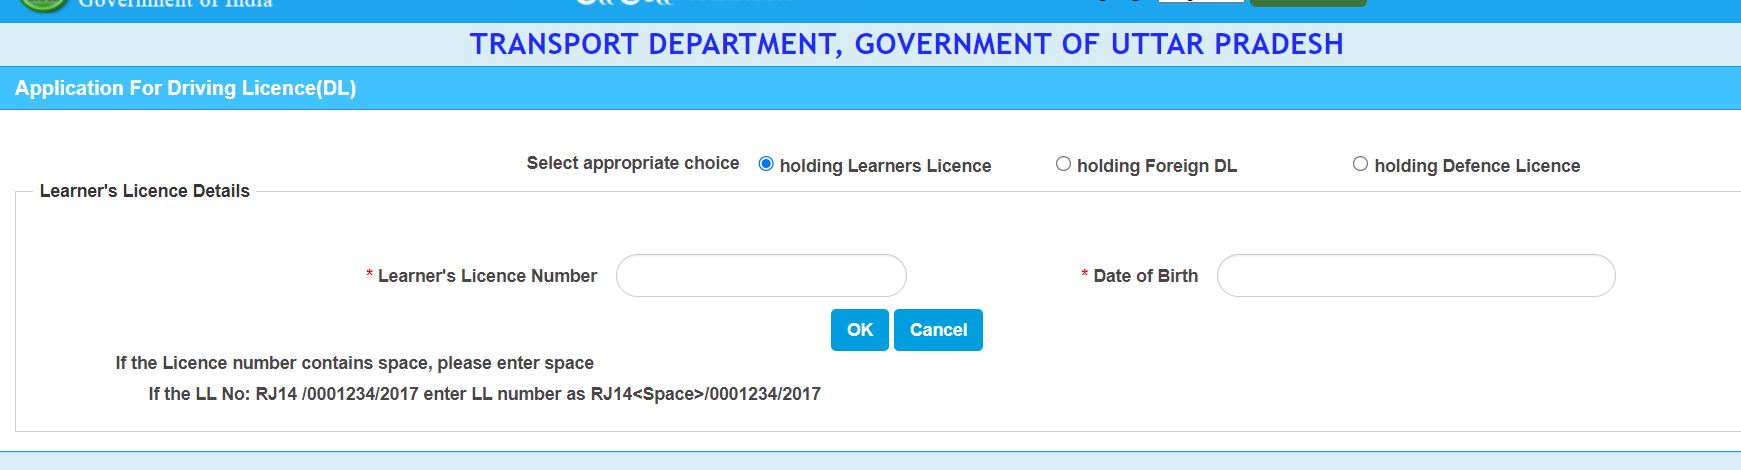 UP Driving Licence Form